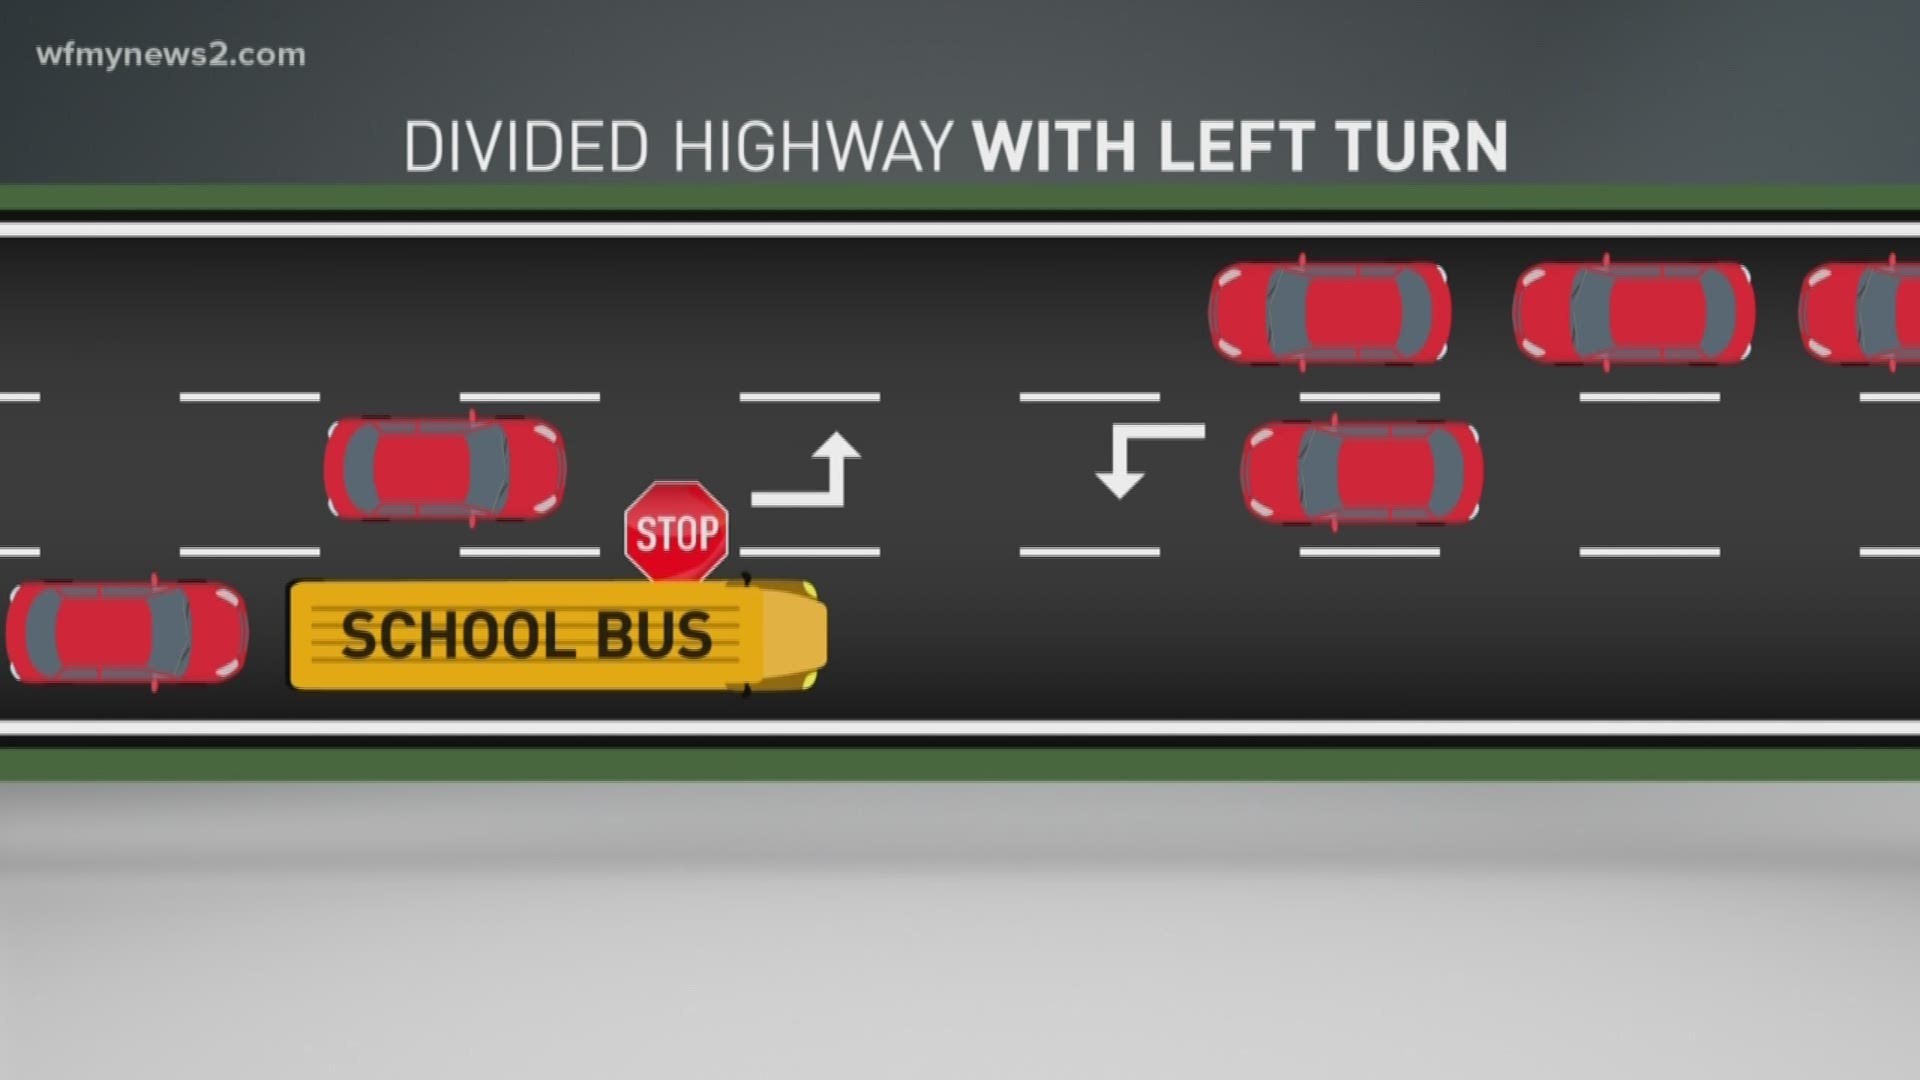 Know When To Stop For A School Bus